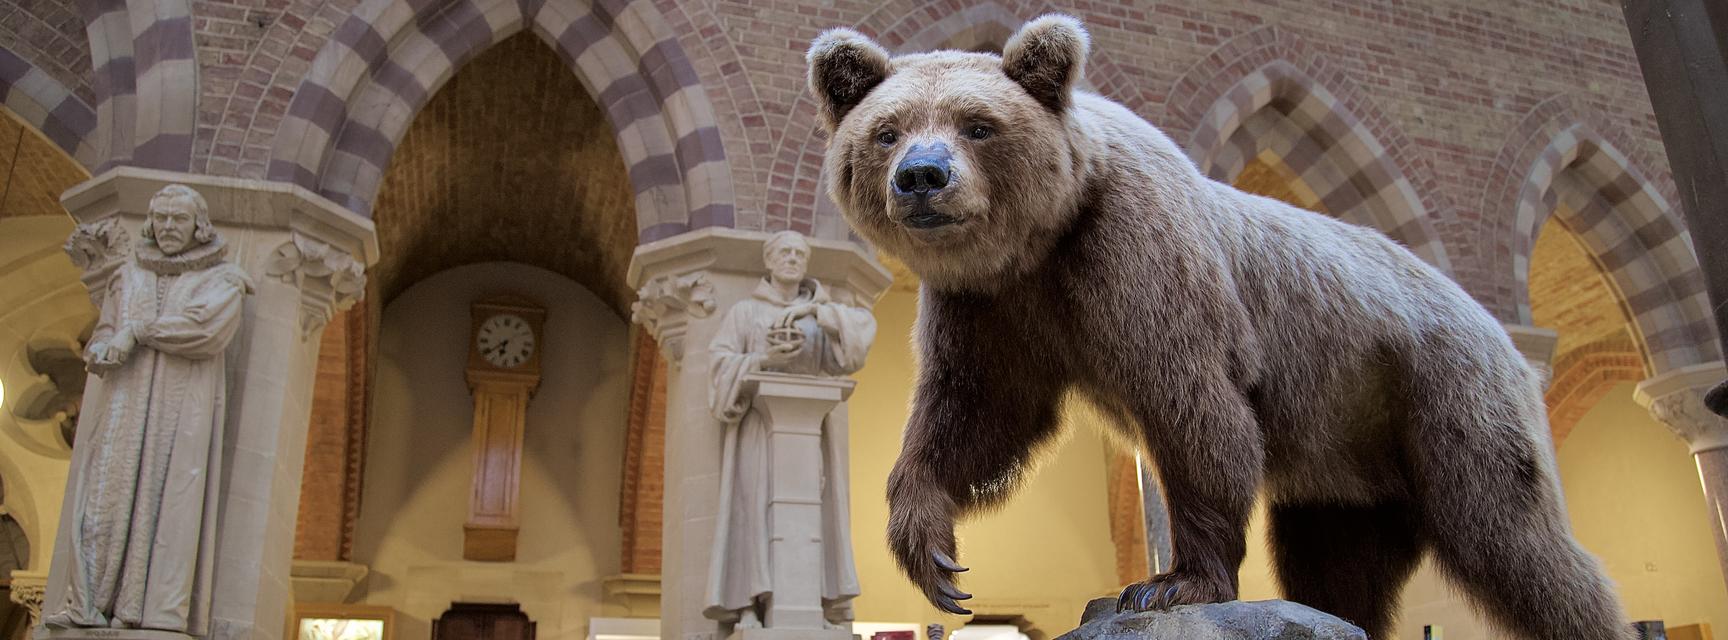 Taxidermy brown bear in Museum entrance